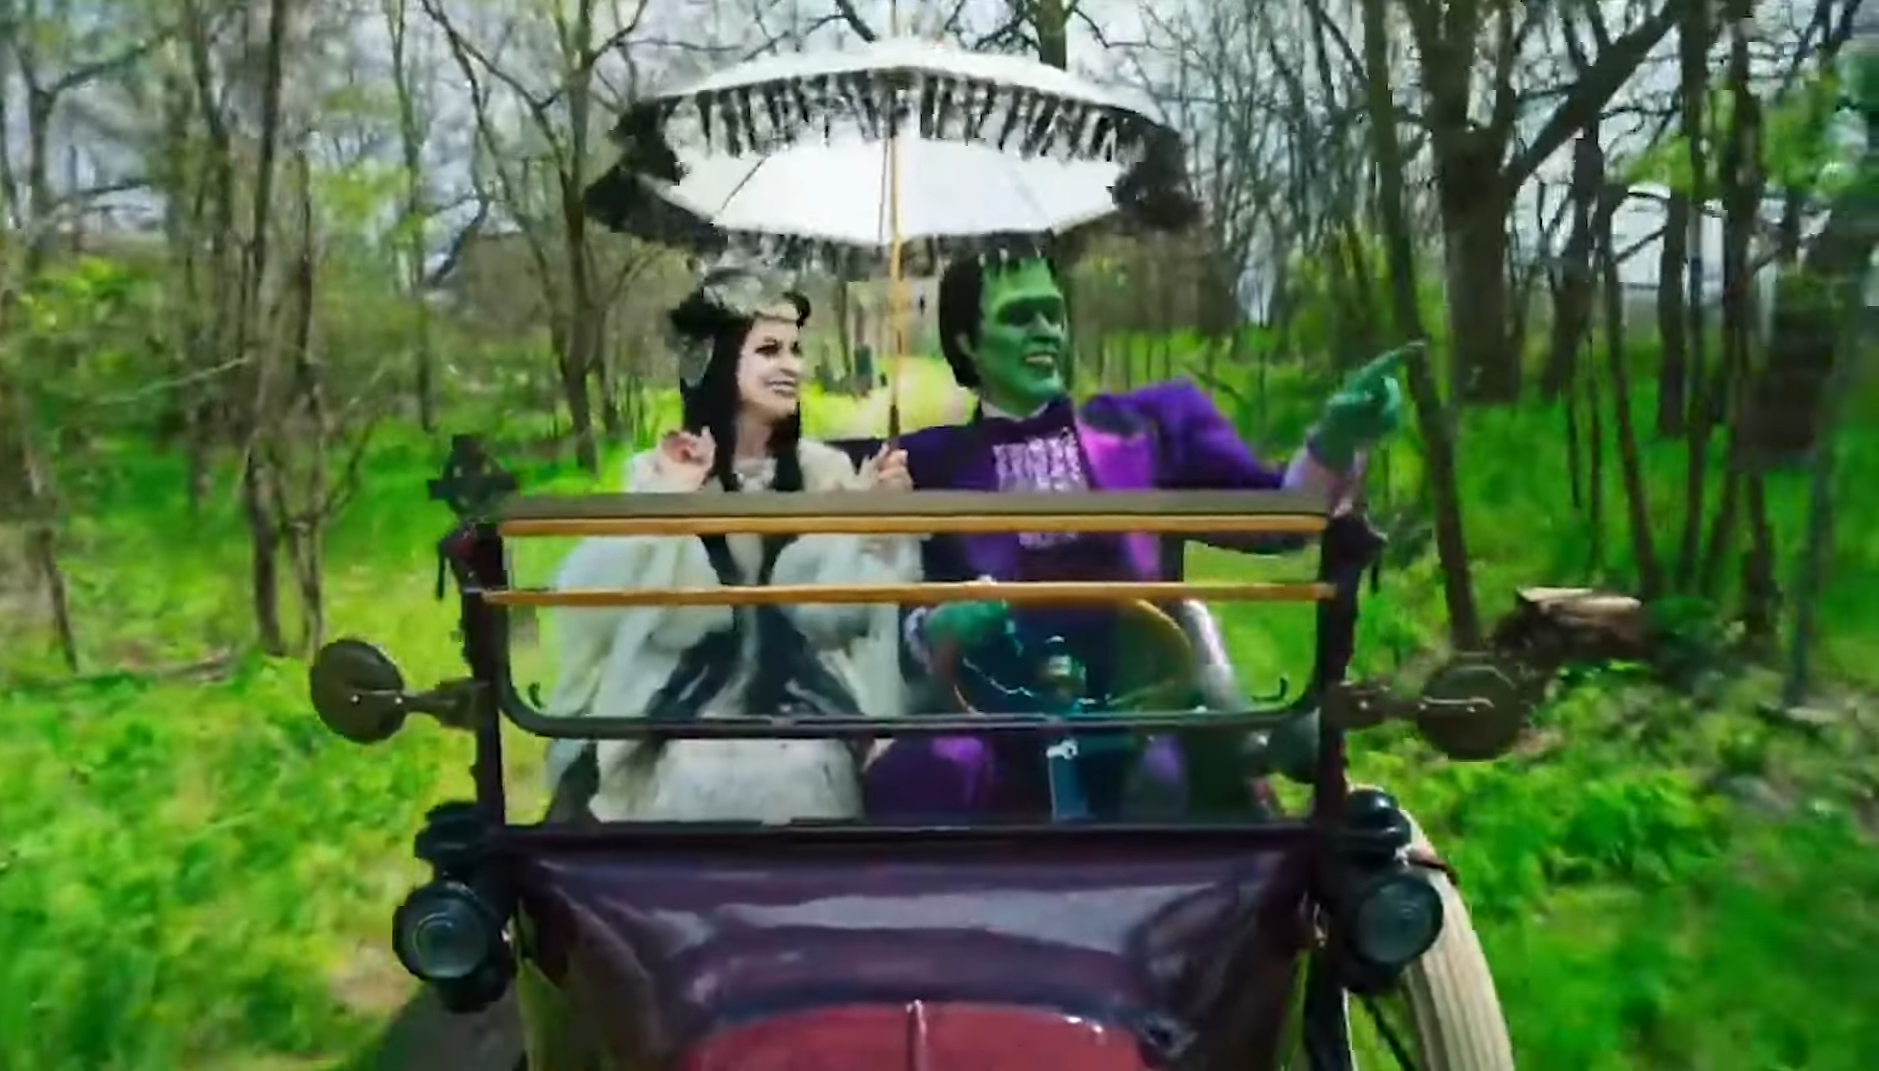 The Munsters - Frankenstein’s Monster and Lily, a vampire, ride in a fancy purple car through a bright green wood. Lily is dressed in white with an elaborate headpiece and parasol, and Herman Munster is pointing at something off screen. They are having a pleasant time